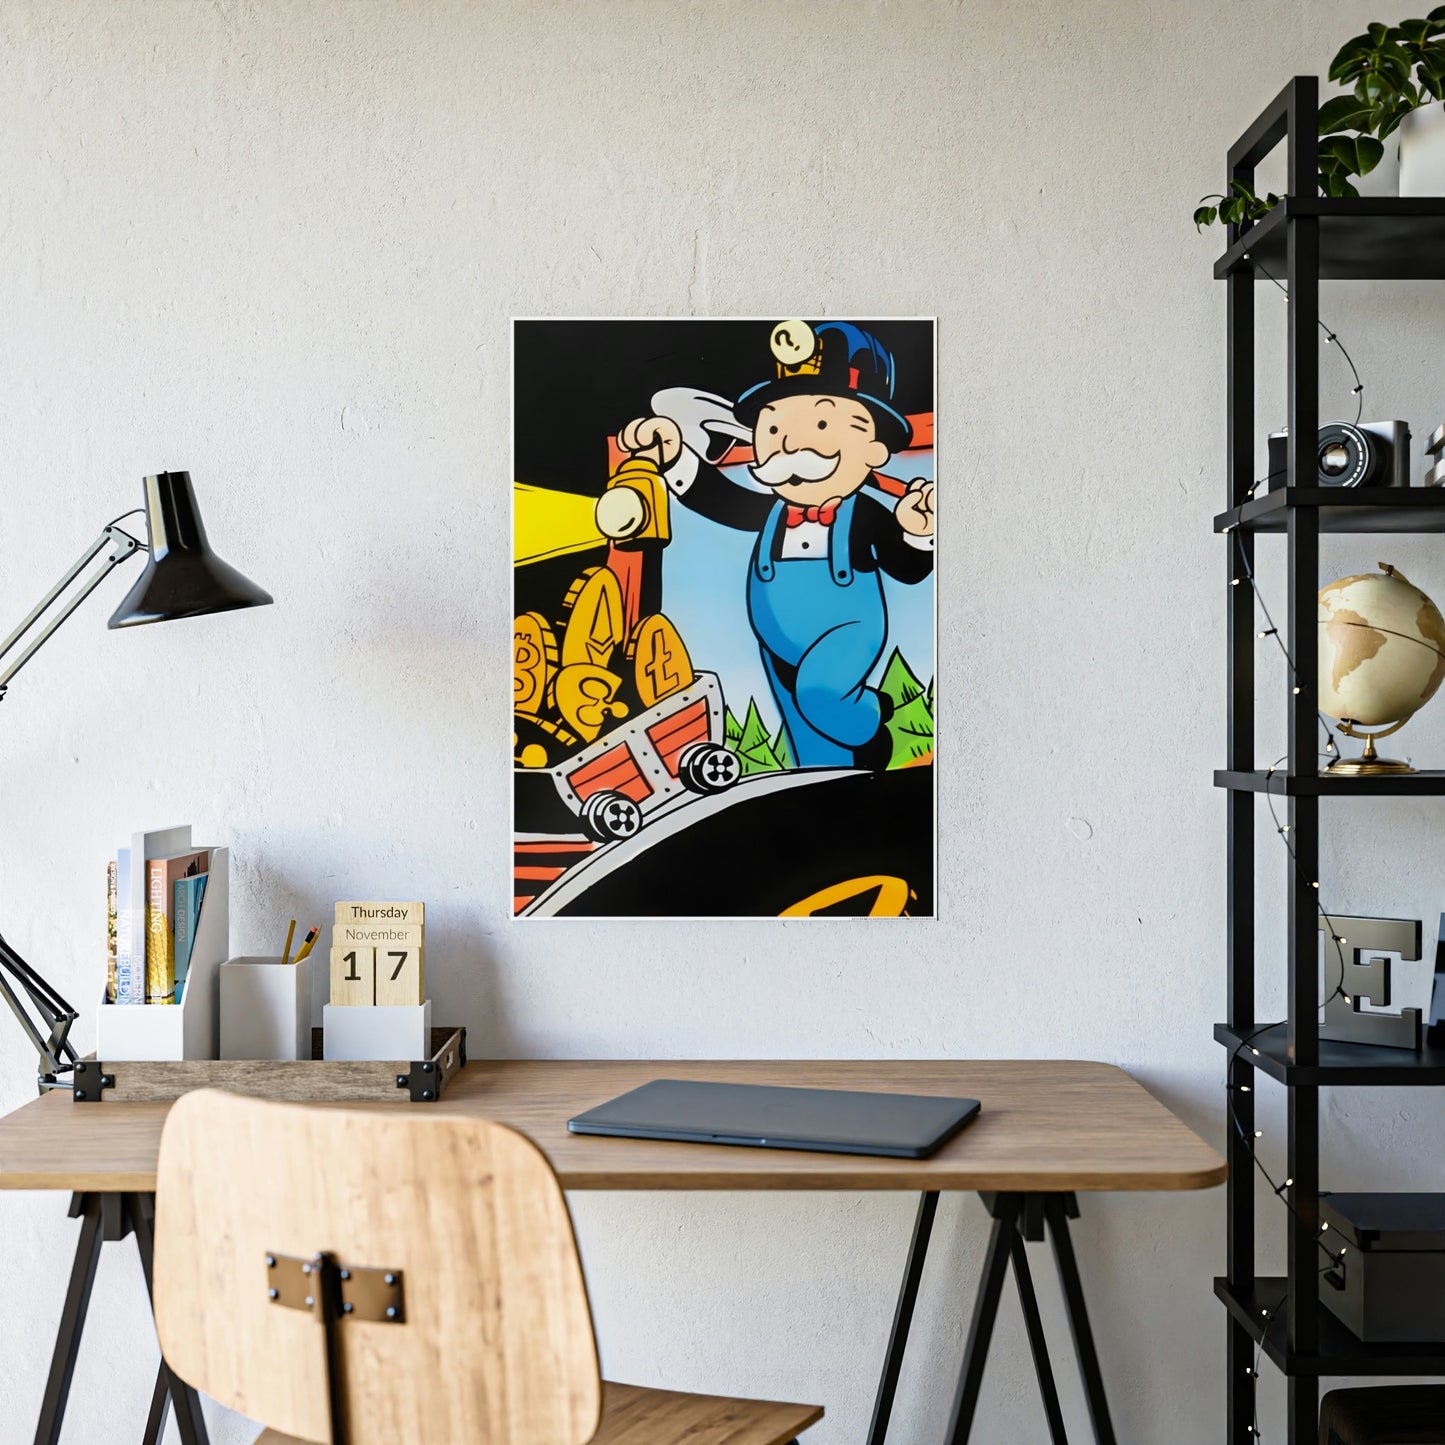 Making Money Moves: Alec Monopoly's Money-Themed Art in Poster and Canvas